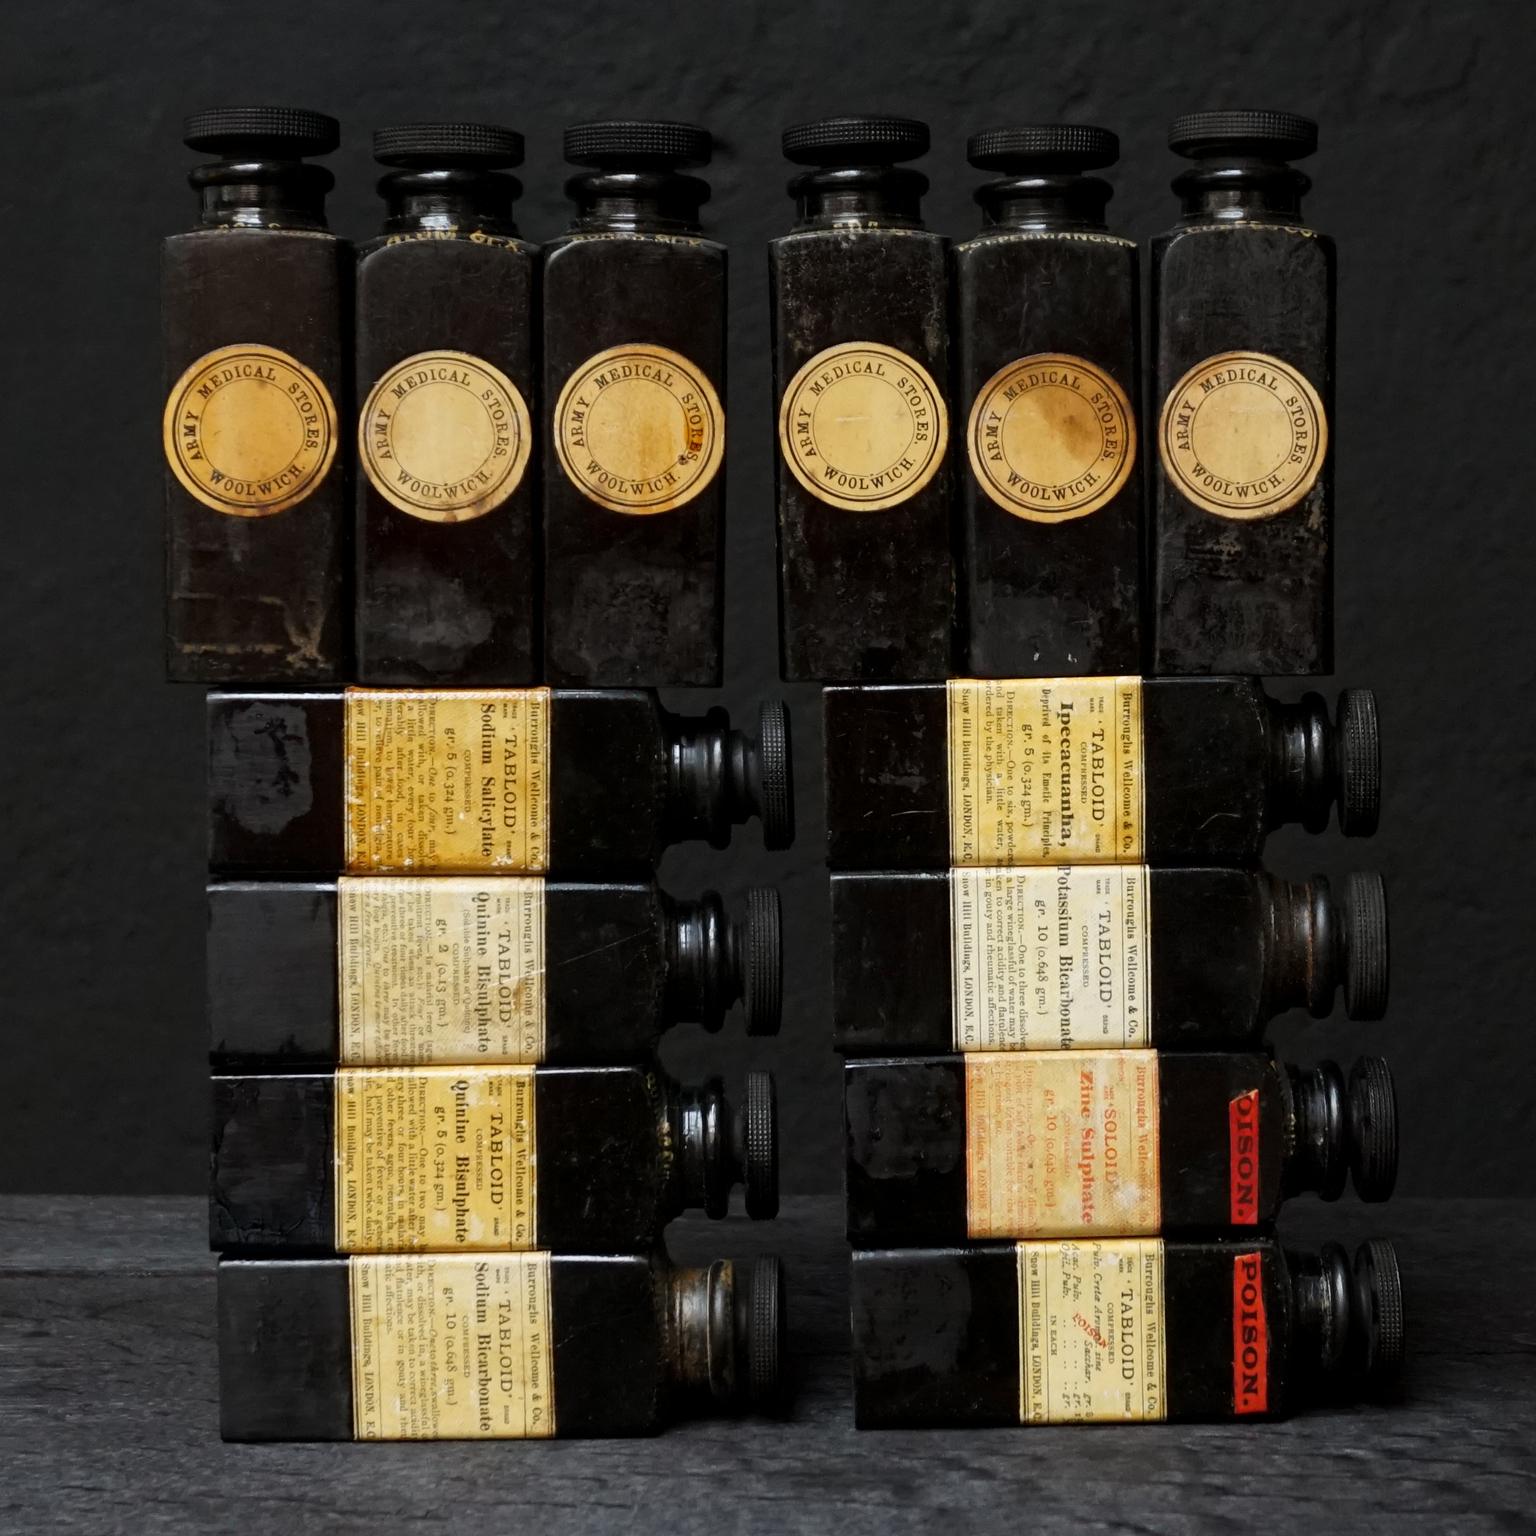 Fourteen black Bakelite Burroughs Wellcome & Co of London medicine bottles.
Medicine bottles like these where used on the British Terra Nova Antarctic Expeditions 1910-1913 and by Walter Wellman for a Transatlantic balloon flight in